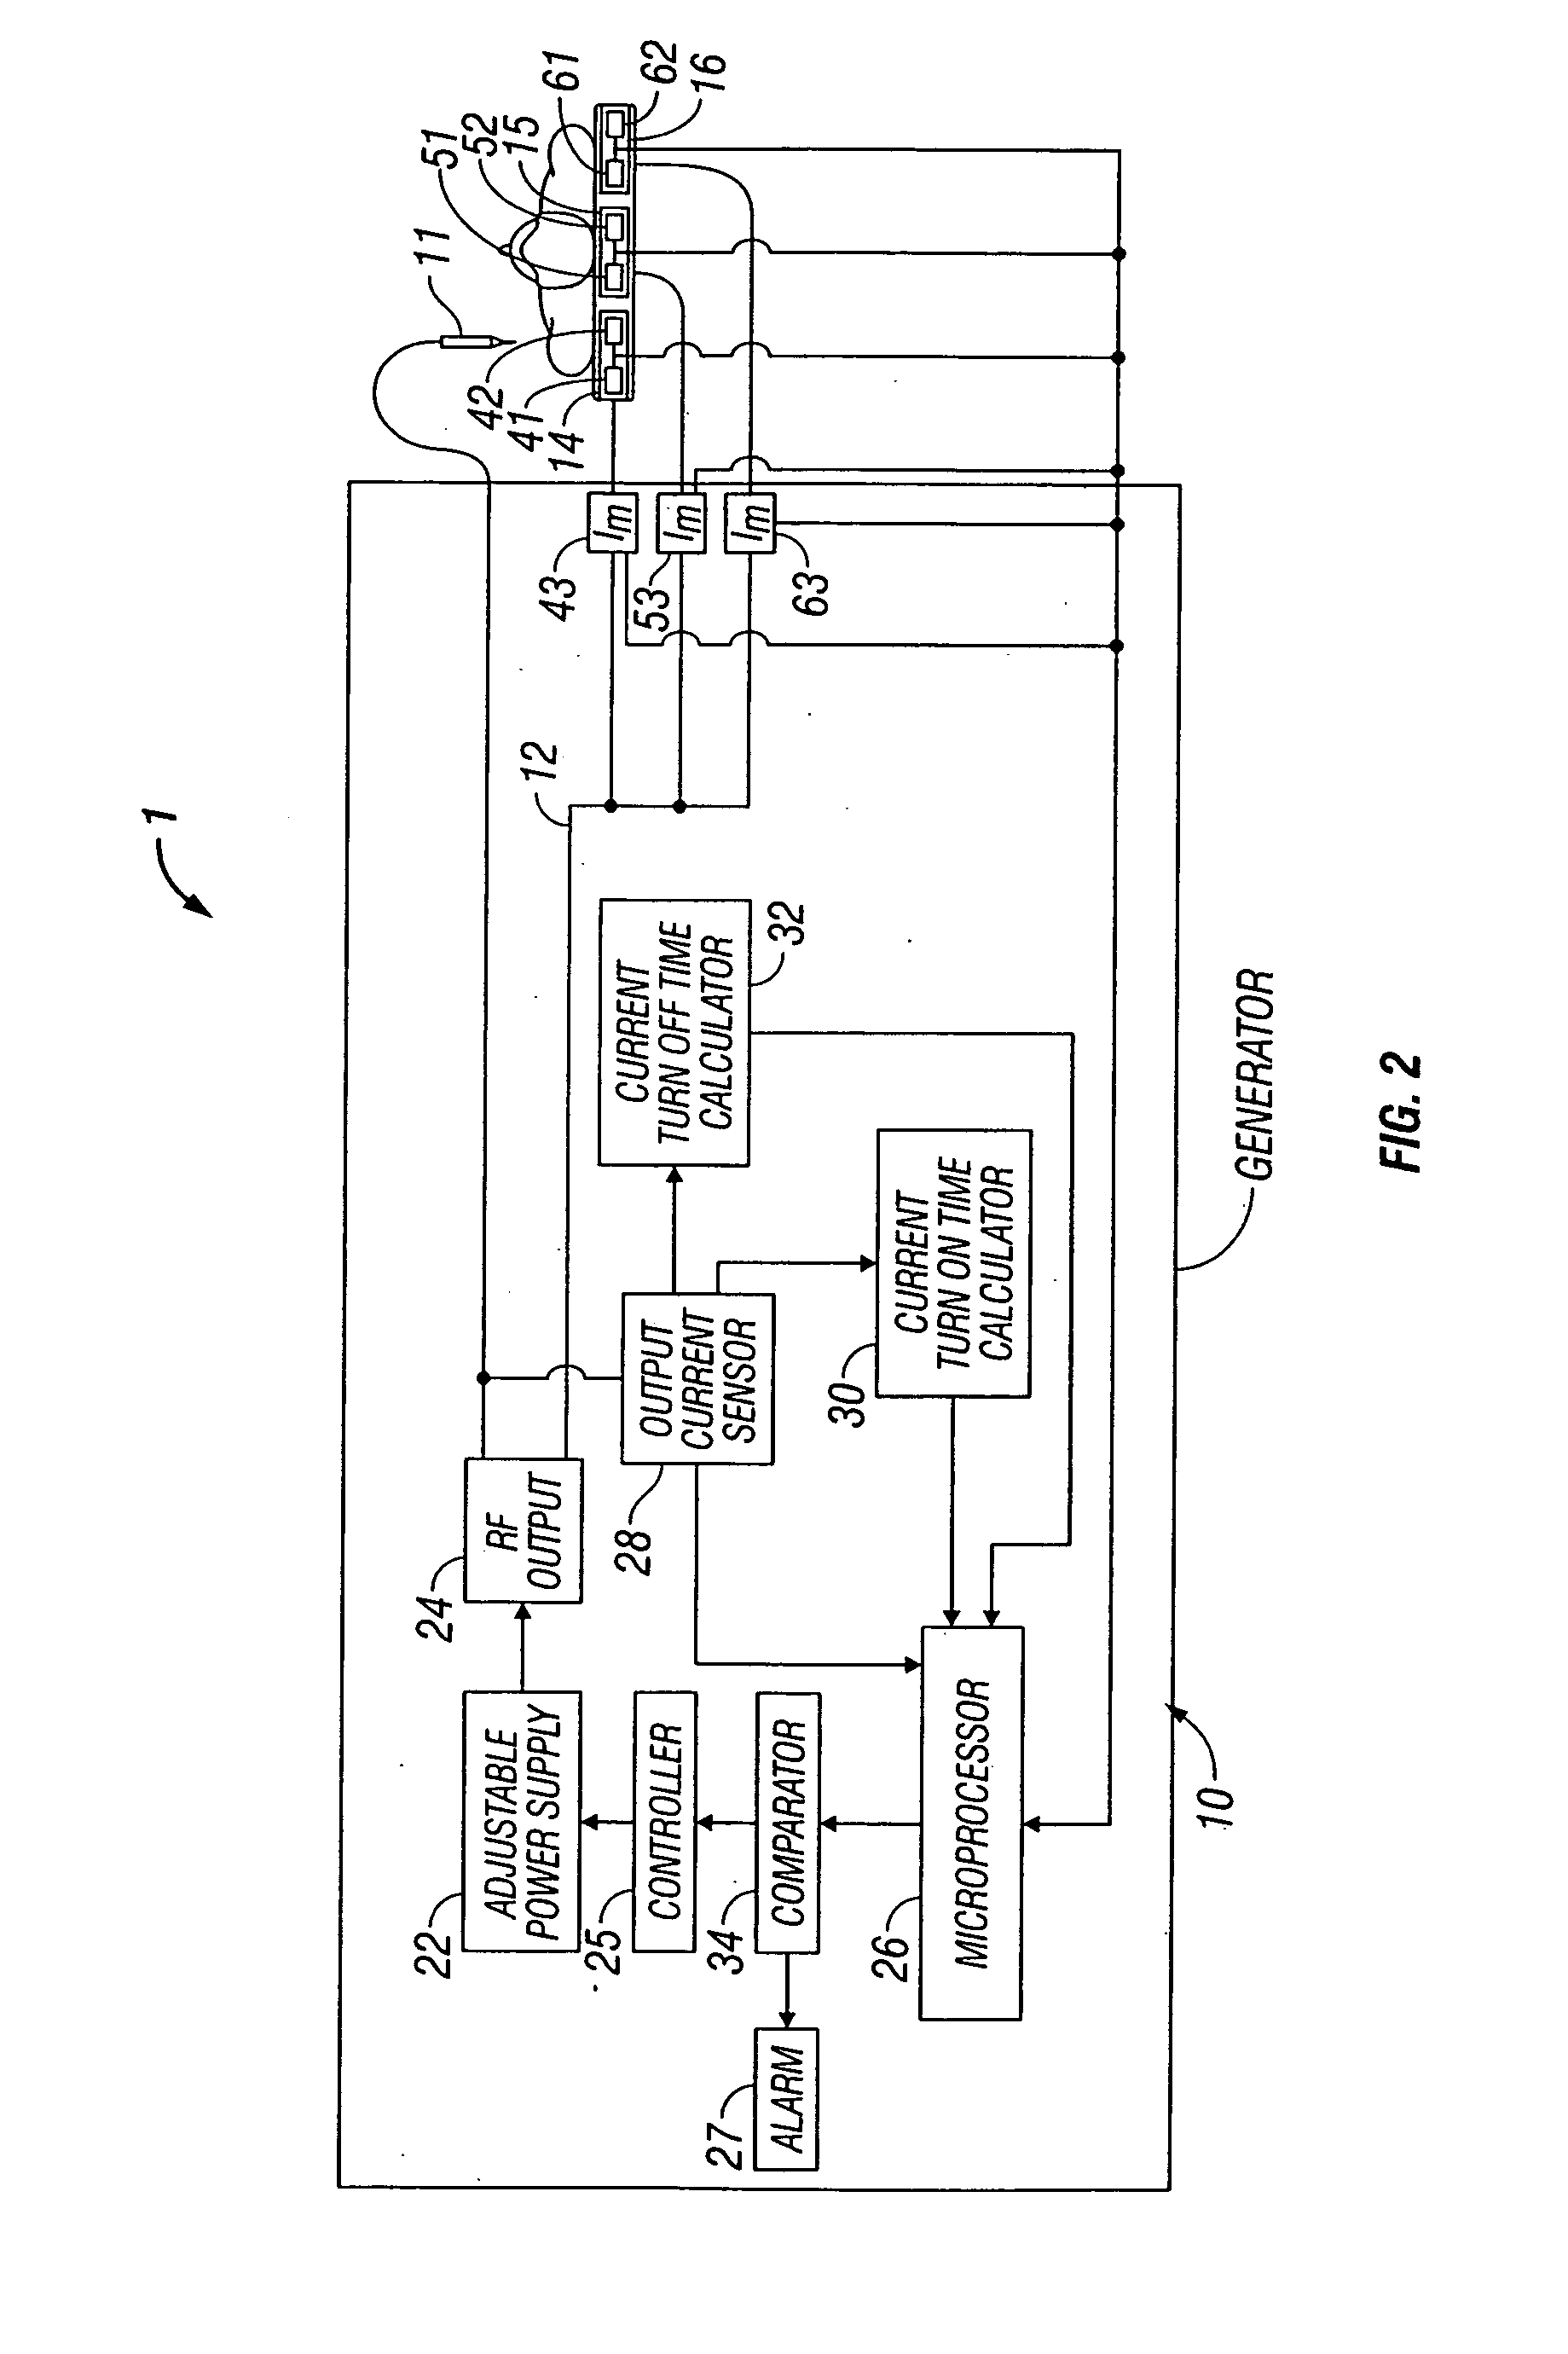 System and method for return electrode monitoring